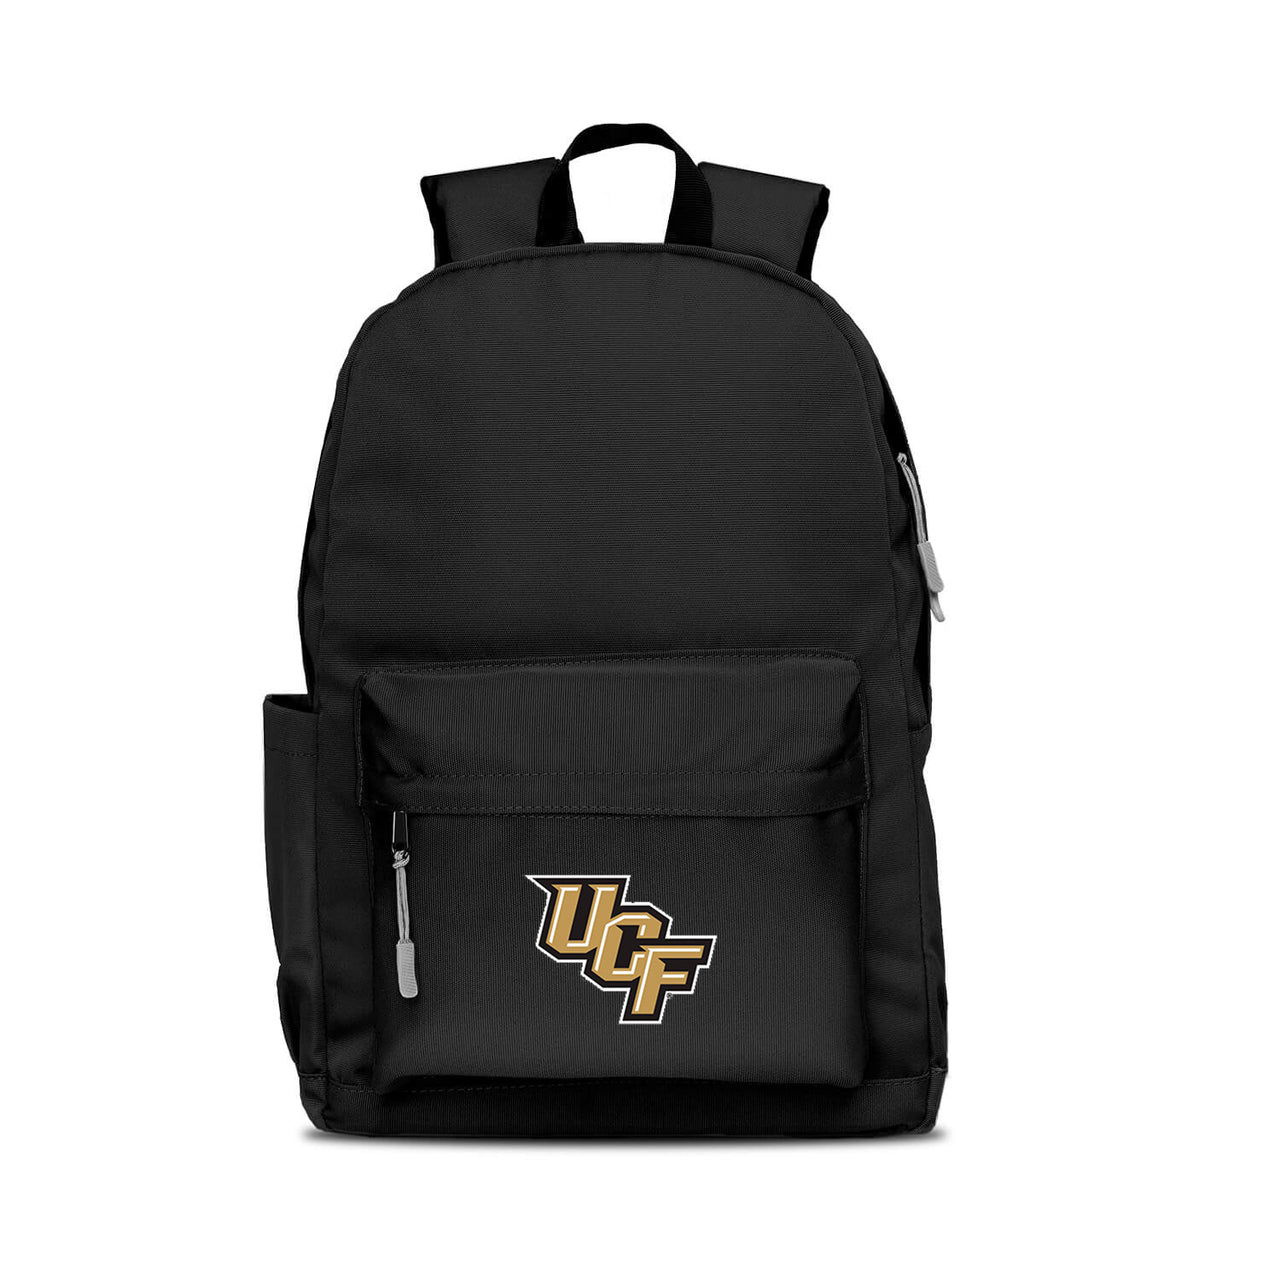 UCF Knights Campus Laptop Backpack- Black